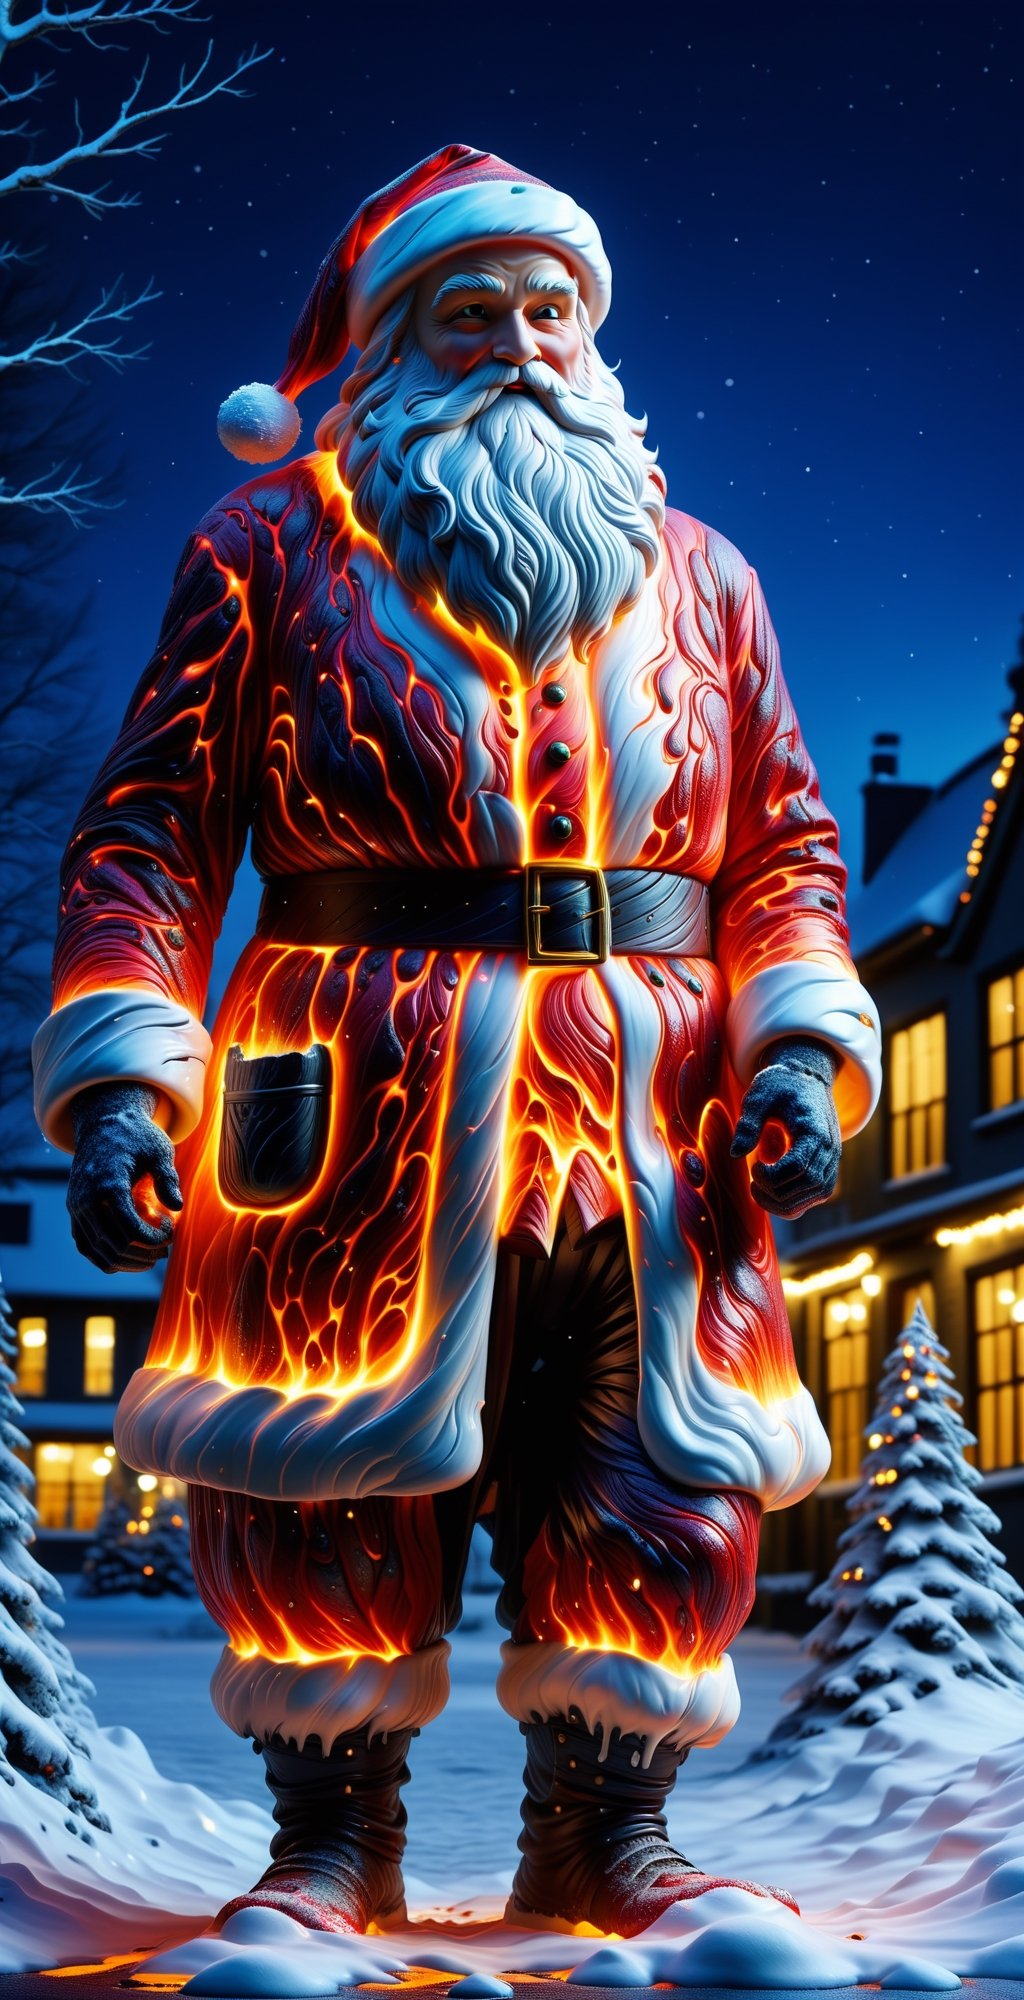 full-length Santa Claus statue, in the city at night, lights on and low light, Christmas theme, snow, close-up cracks in the statue with ral lava, lava flowing through the cracks in the ral porcelain, at night